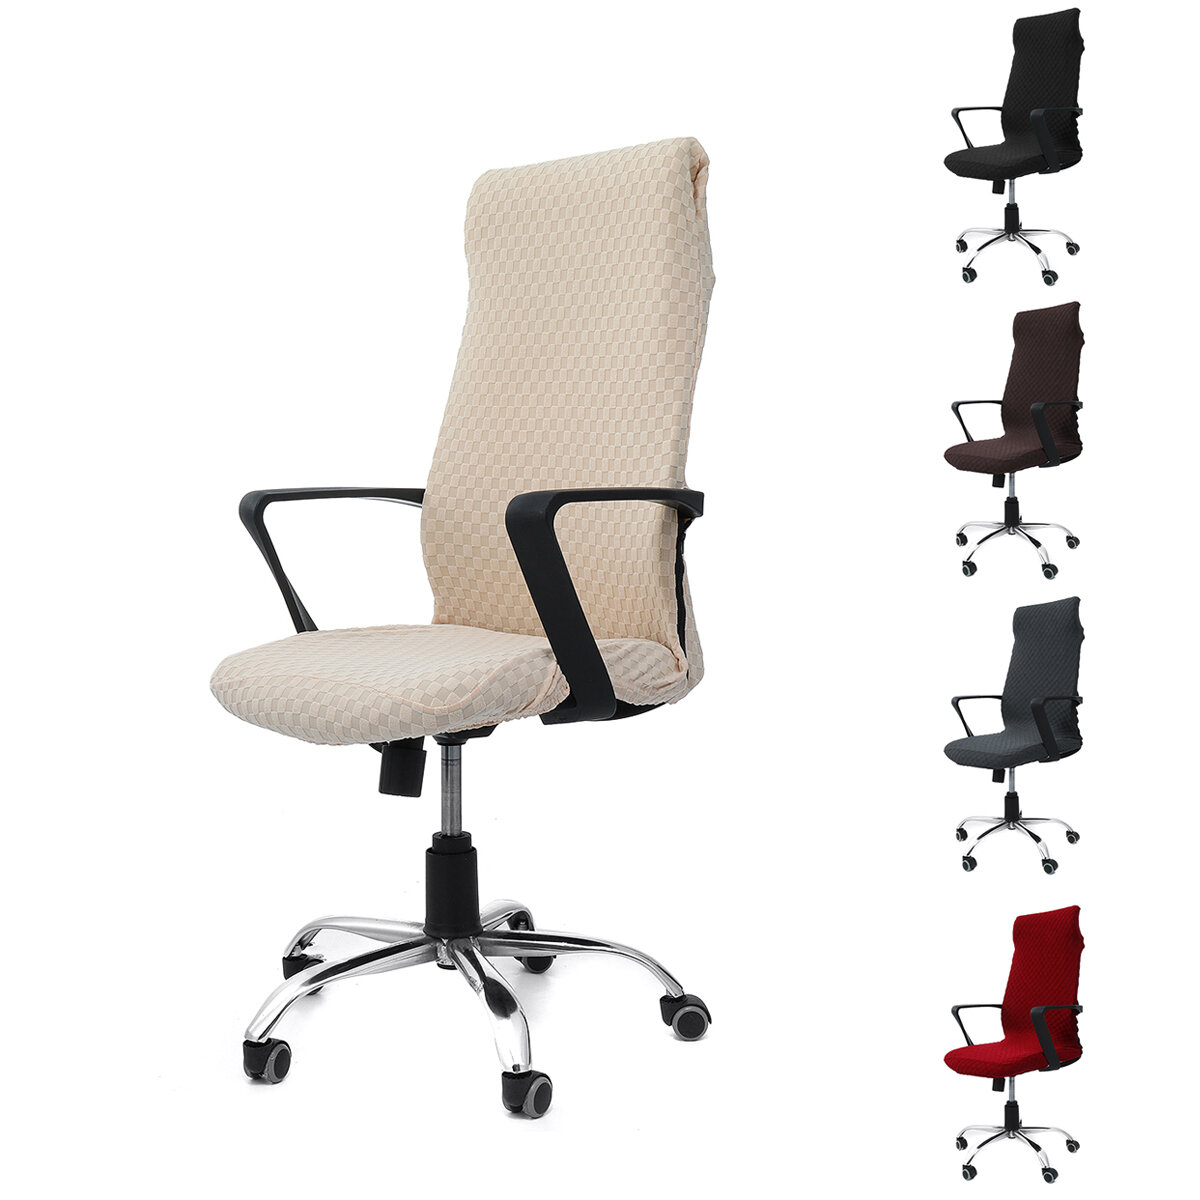 

45-56cm Office Chair Cover Removable Stretch Chair Protector Rotating Armchair Seat Slipcover for Home Office Chair Deco